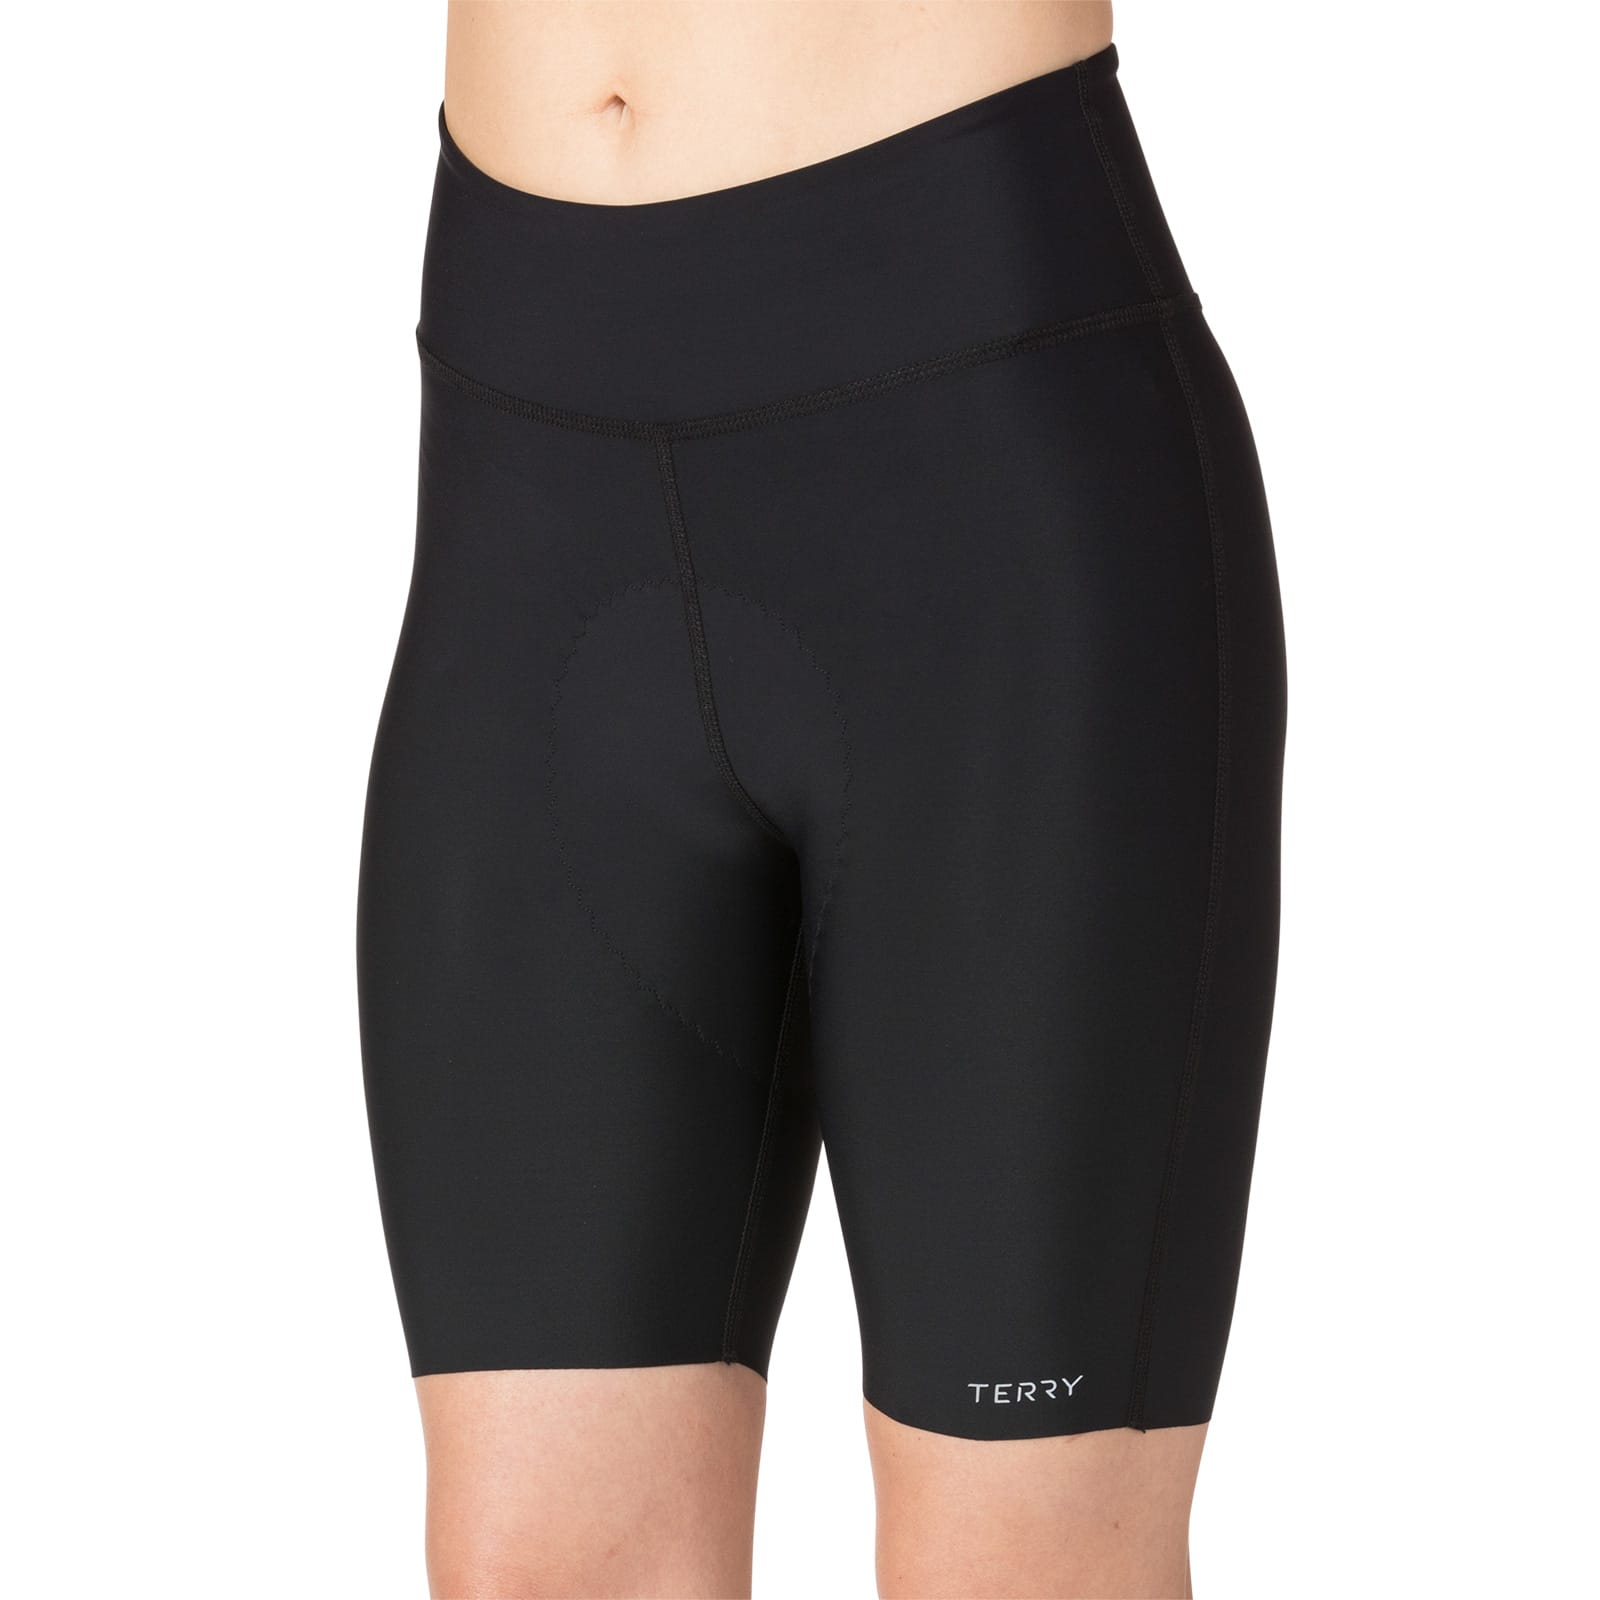 BEST INDOOR CYCLING SHORTS – A SPIN INSTRUCTOR’S PICK. - Terry Peloton.